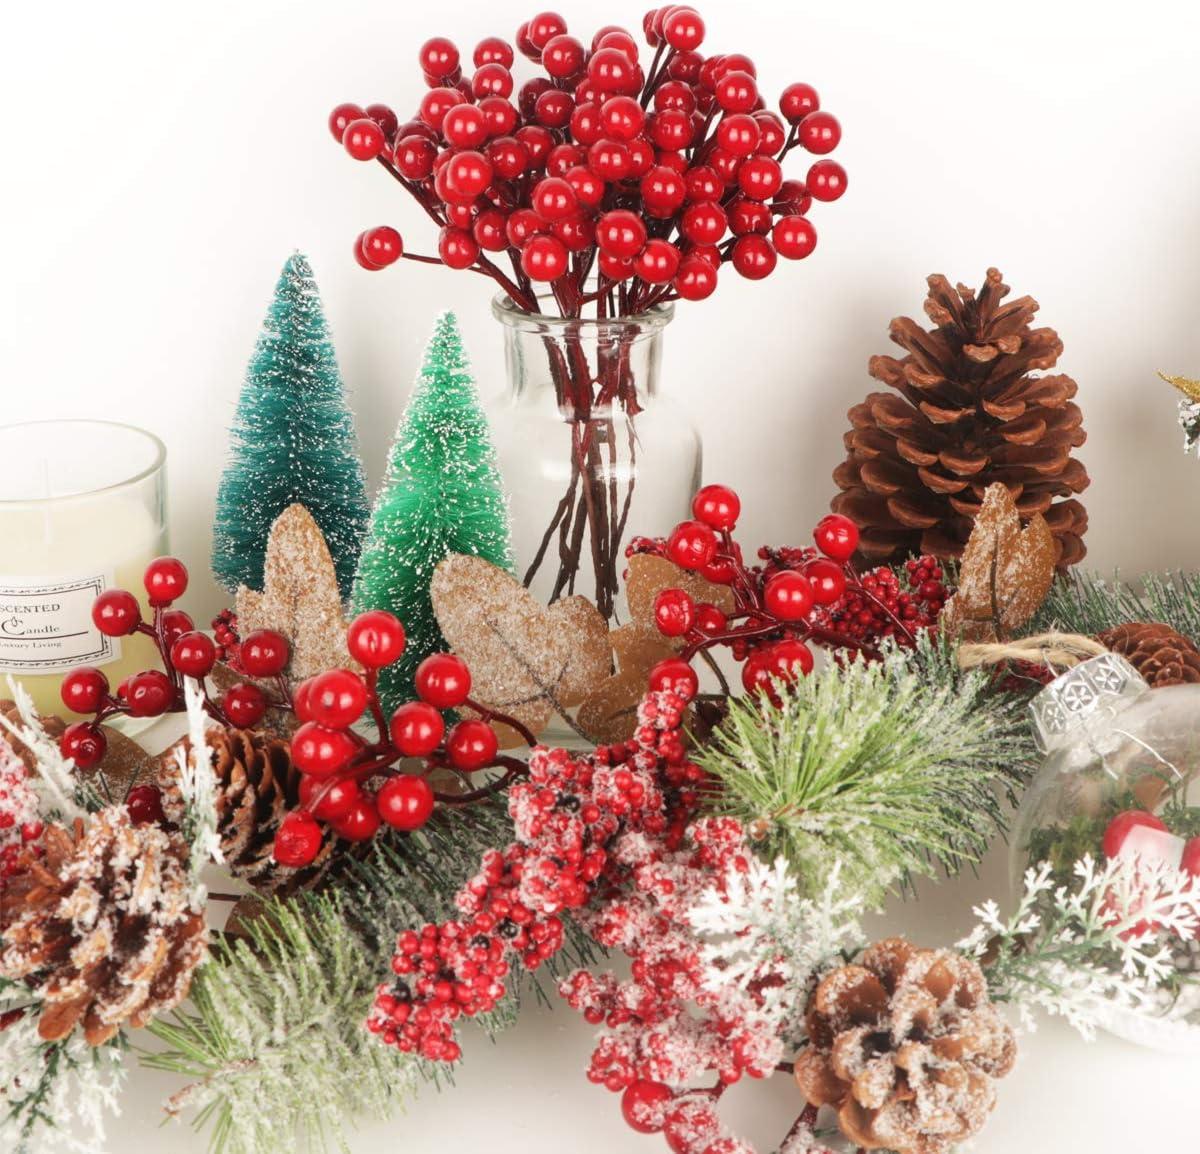 Babody Artificial Christmas Picks Branches,10 Pcs White Christmas Berries Red Berry Stems Pine Branches,Christmas Greenery Picks,Winter Foral Picks